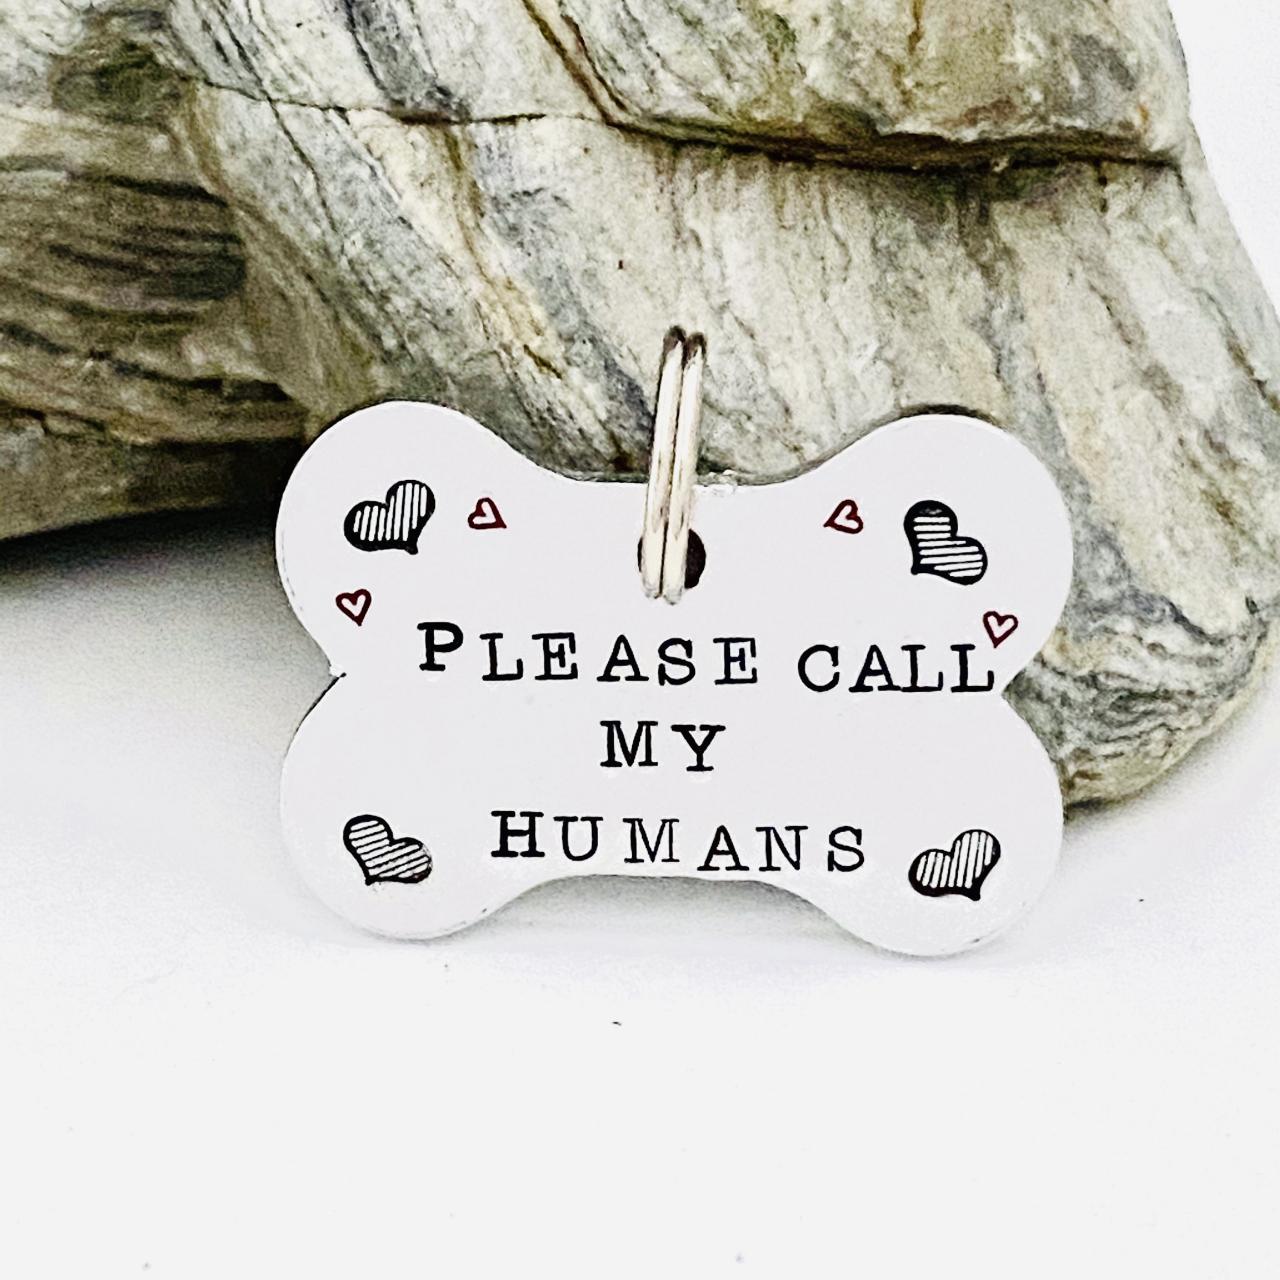 Bone Shaped Dog Tag, Dog Id Tag, Personalised Dog Tag, Dog Tags For Dogs, Gift For The Dog, Id Pet Tag, Custom Pet Tag, Pet Name Tag, Puppy.